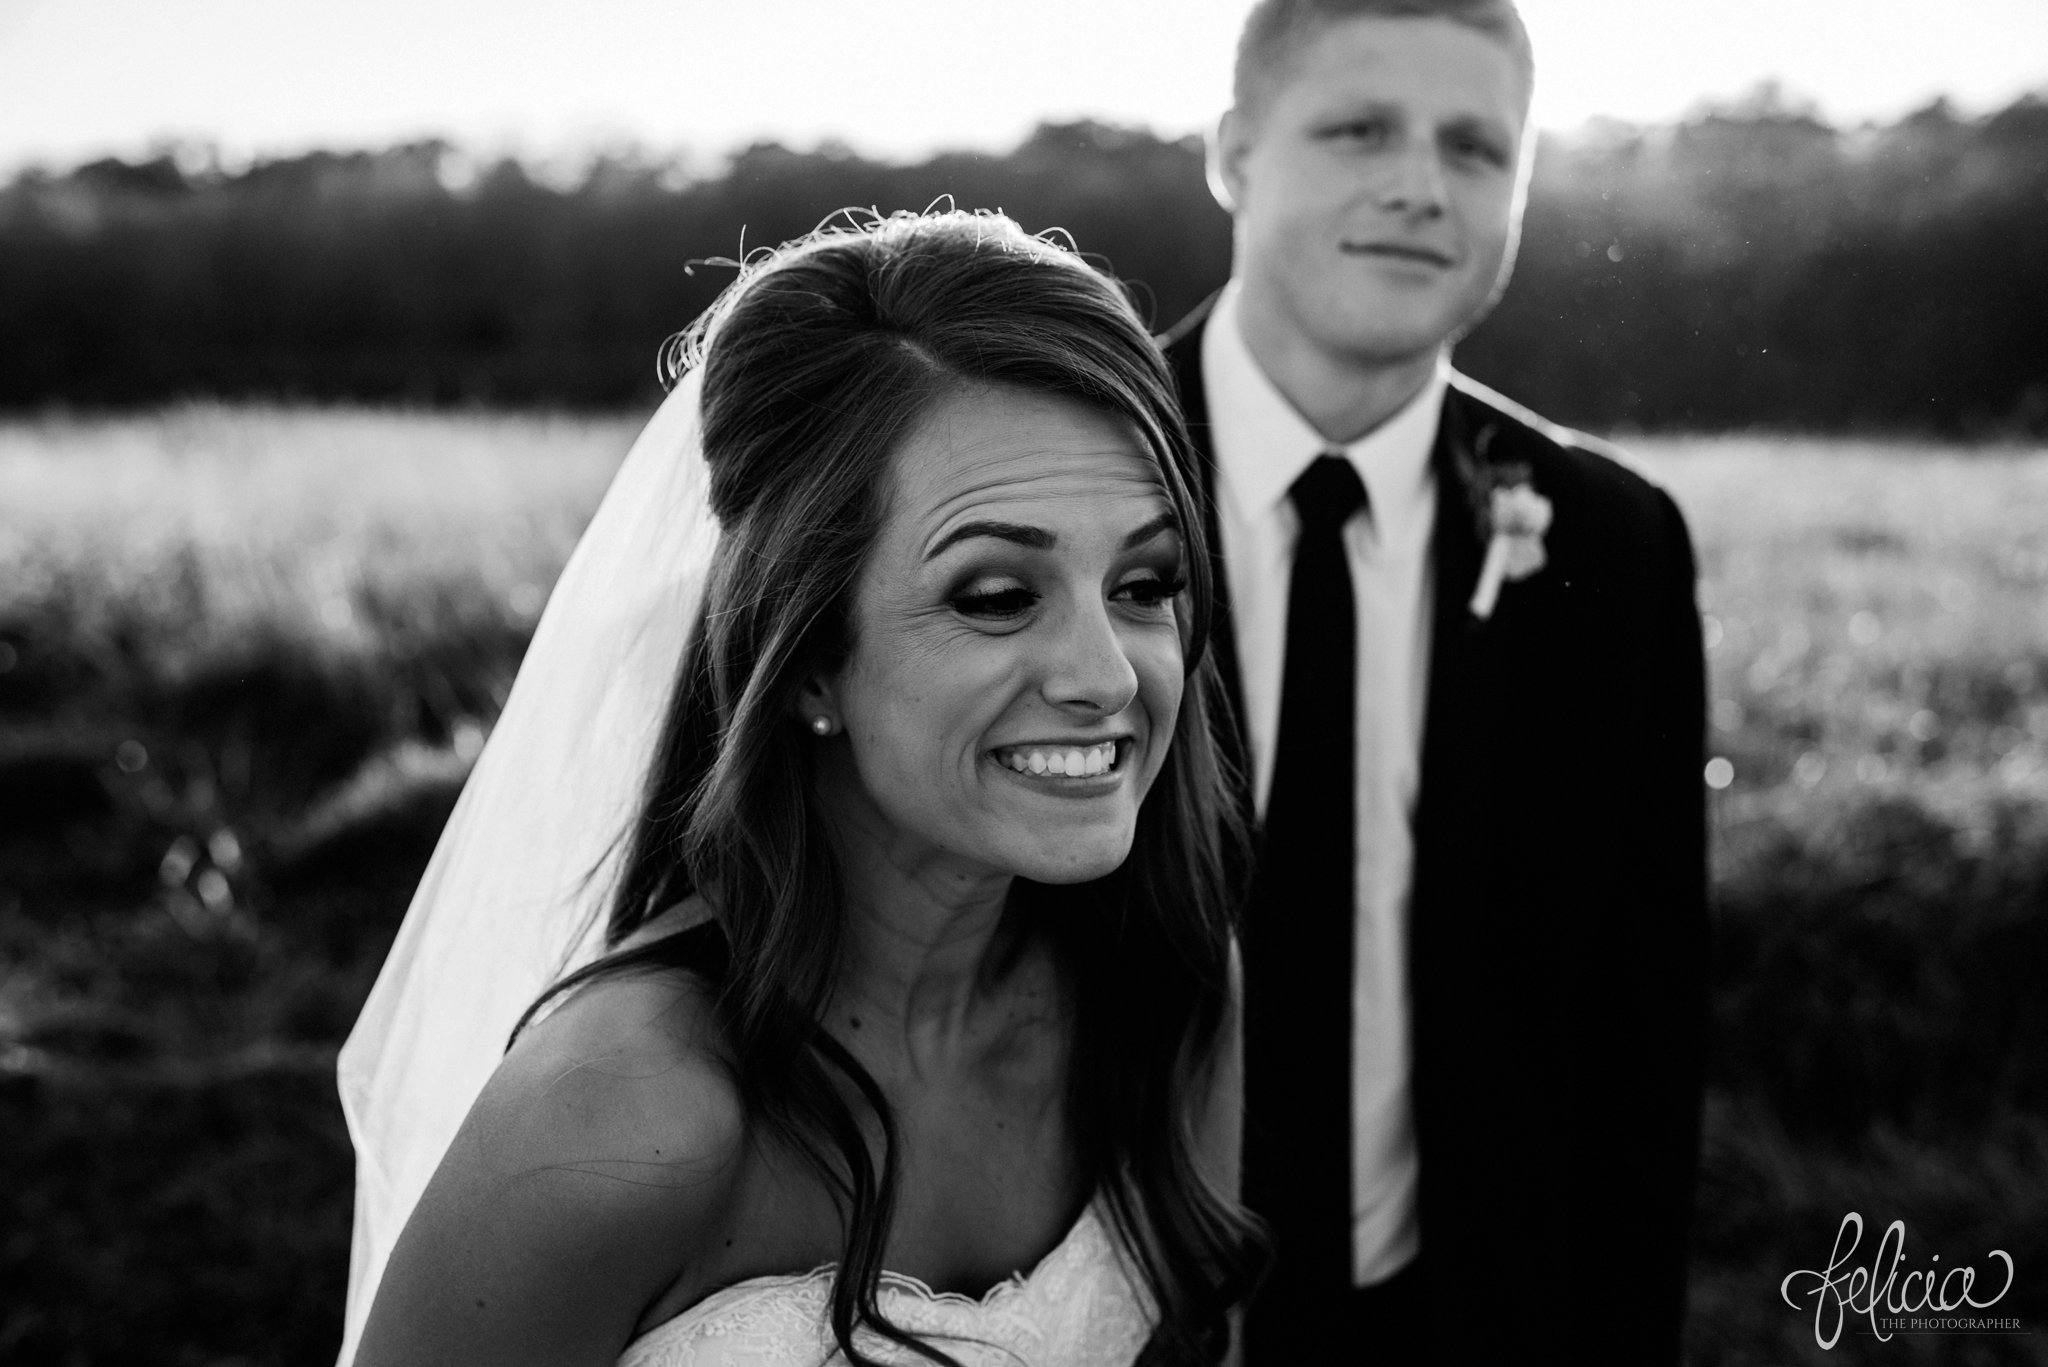 black and white | wedding | wedding photos | Rumely Event Space | wedding photography | images by feliciathephotographer.com | field background | nature | bride and groom portraits | sunlight | smiling bride | candid 